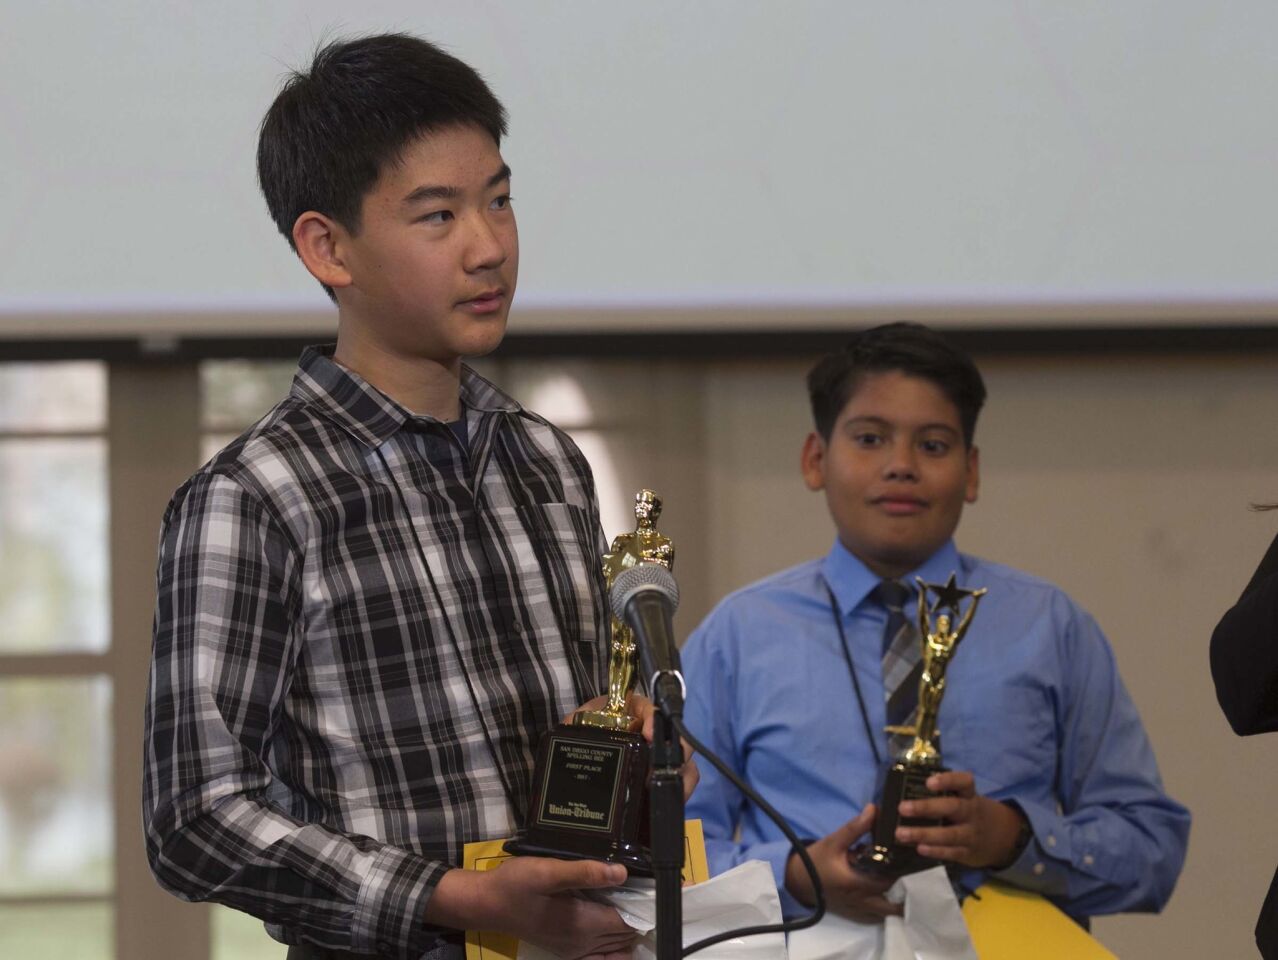 The winner of the 49th annual San Diego Union-Tribune county wide spelling bee was Kevin Luo, 13, an eighth grader from Pacific Trails Middle School, who won the by spelling the word "gradine" correct. Gradine means "one of a series of low steps or seats raised one above another." held at Liberty Station. In the background is Felipe Contreras from Pacific Beach Middle School who won second place.